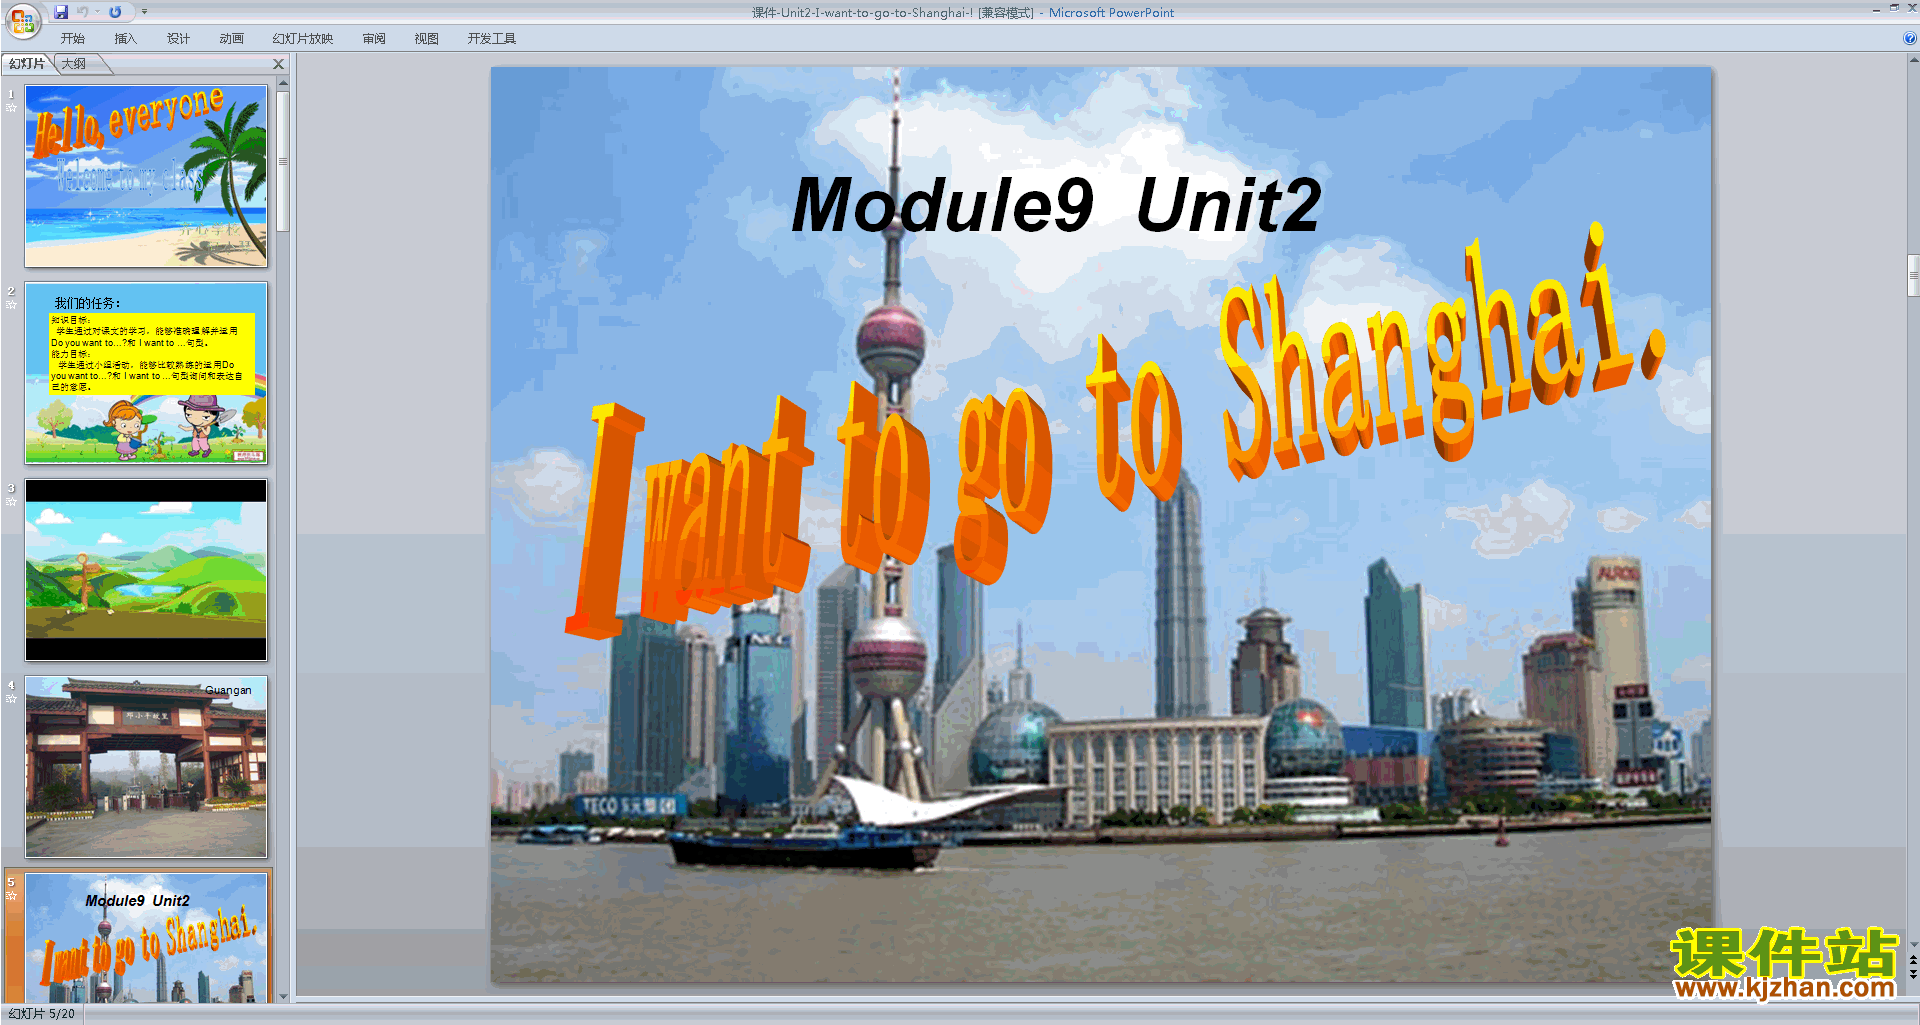 Module9 Unit2 I want to go to Shanghaipptμ14